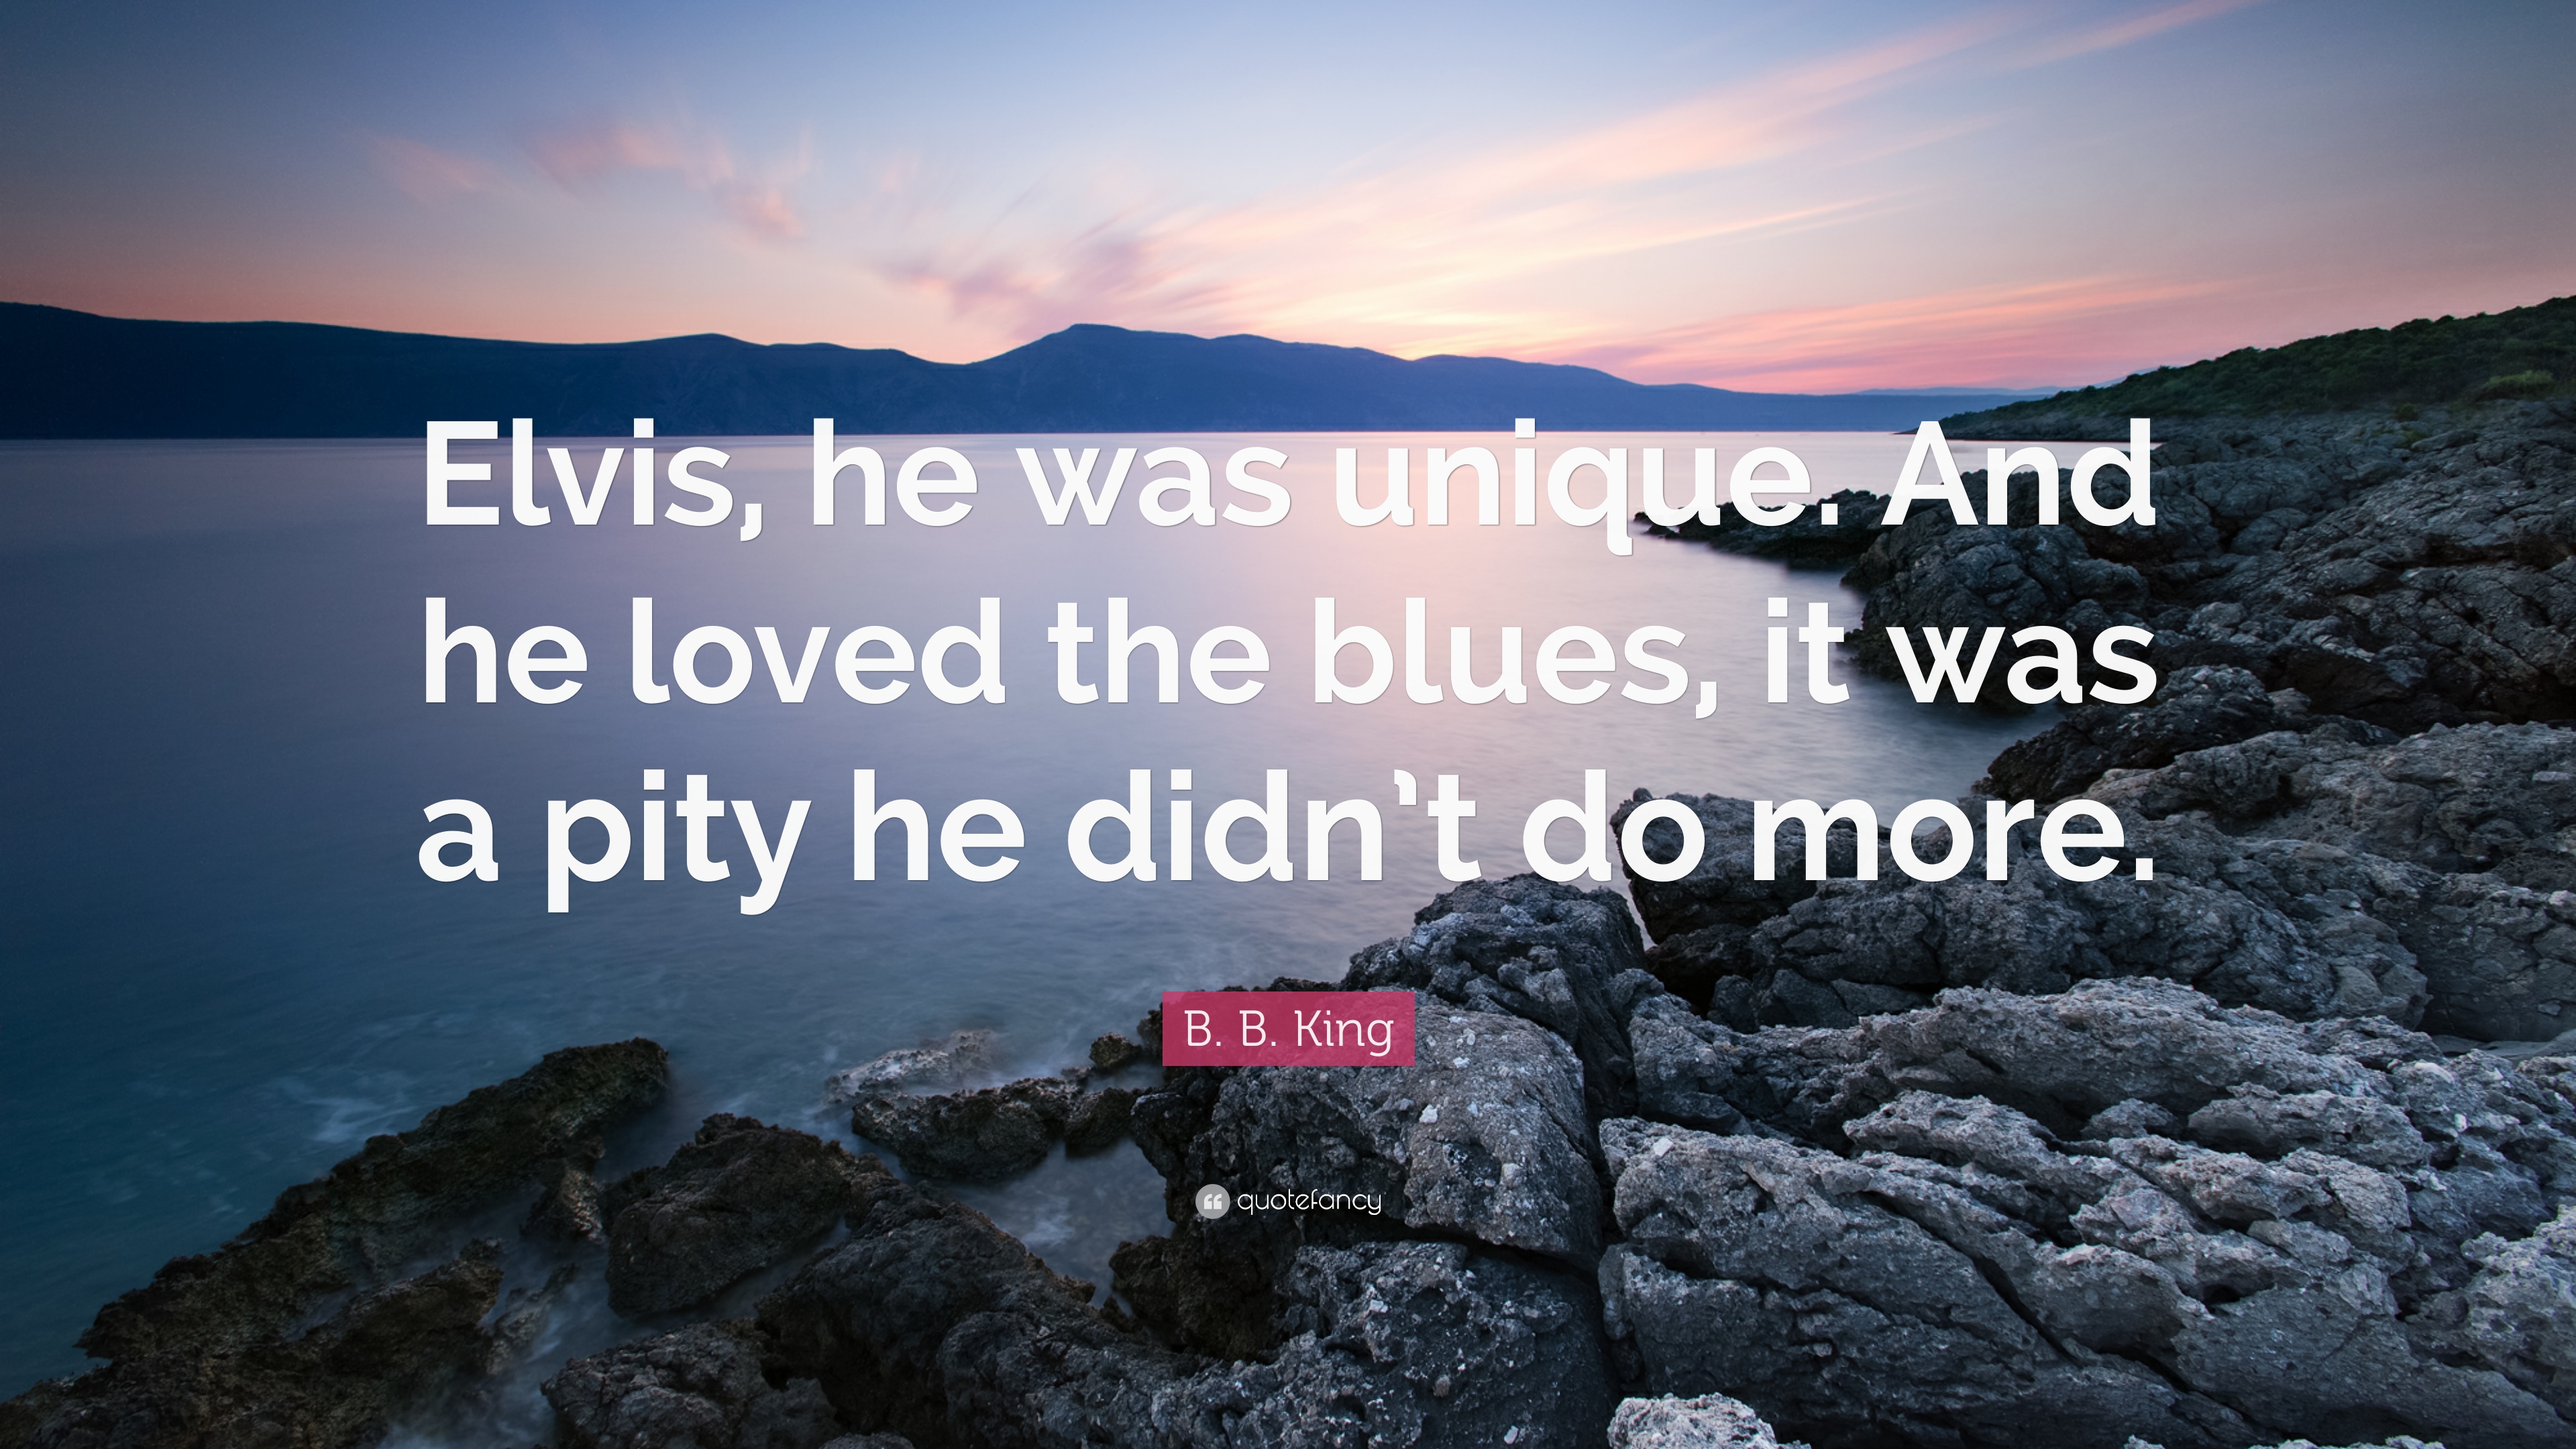 6 Bb King Quotes About Love